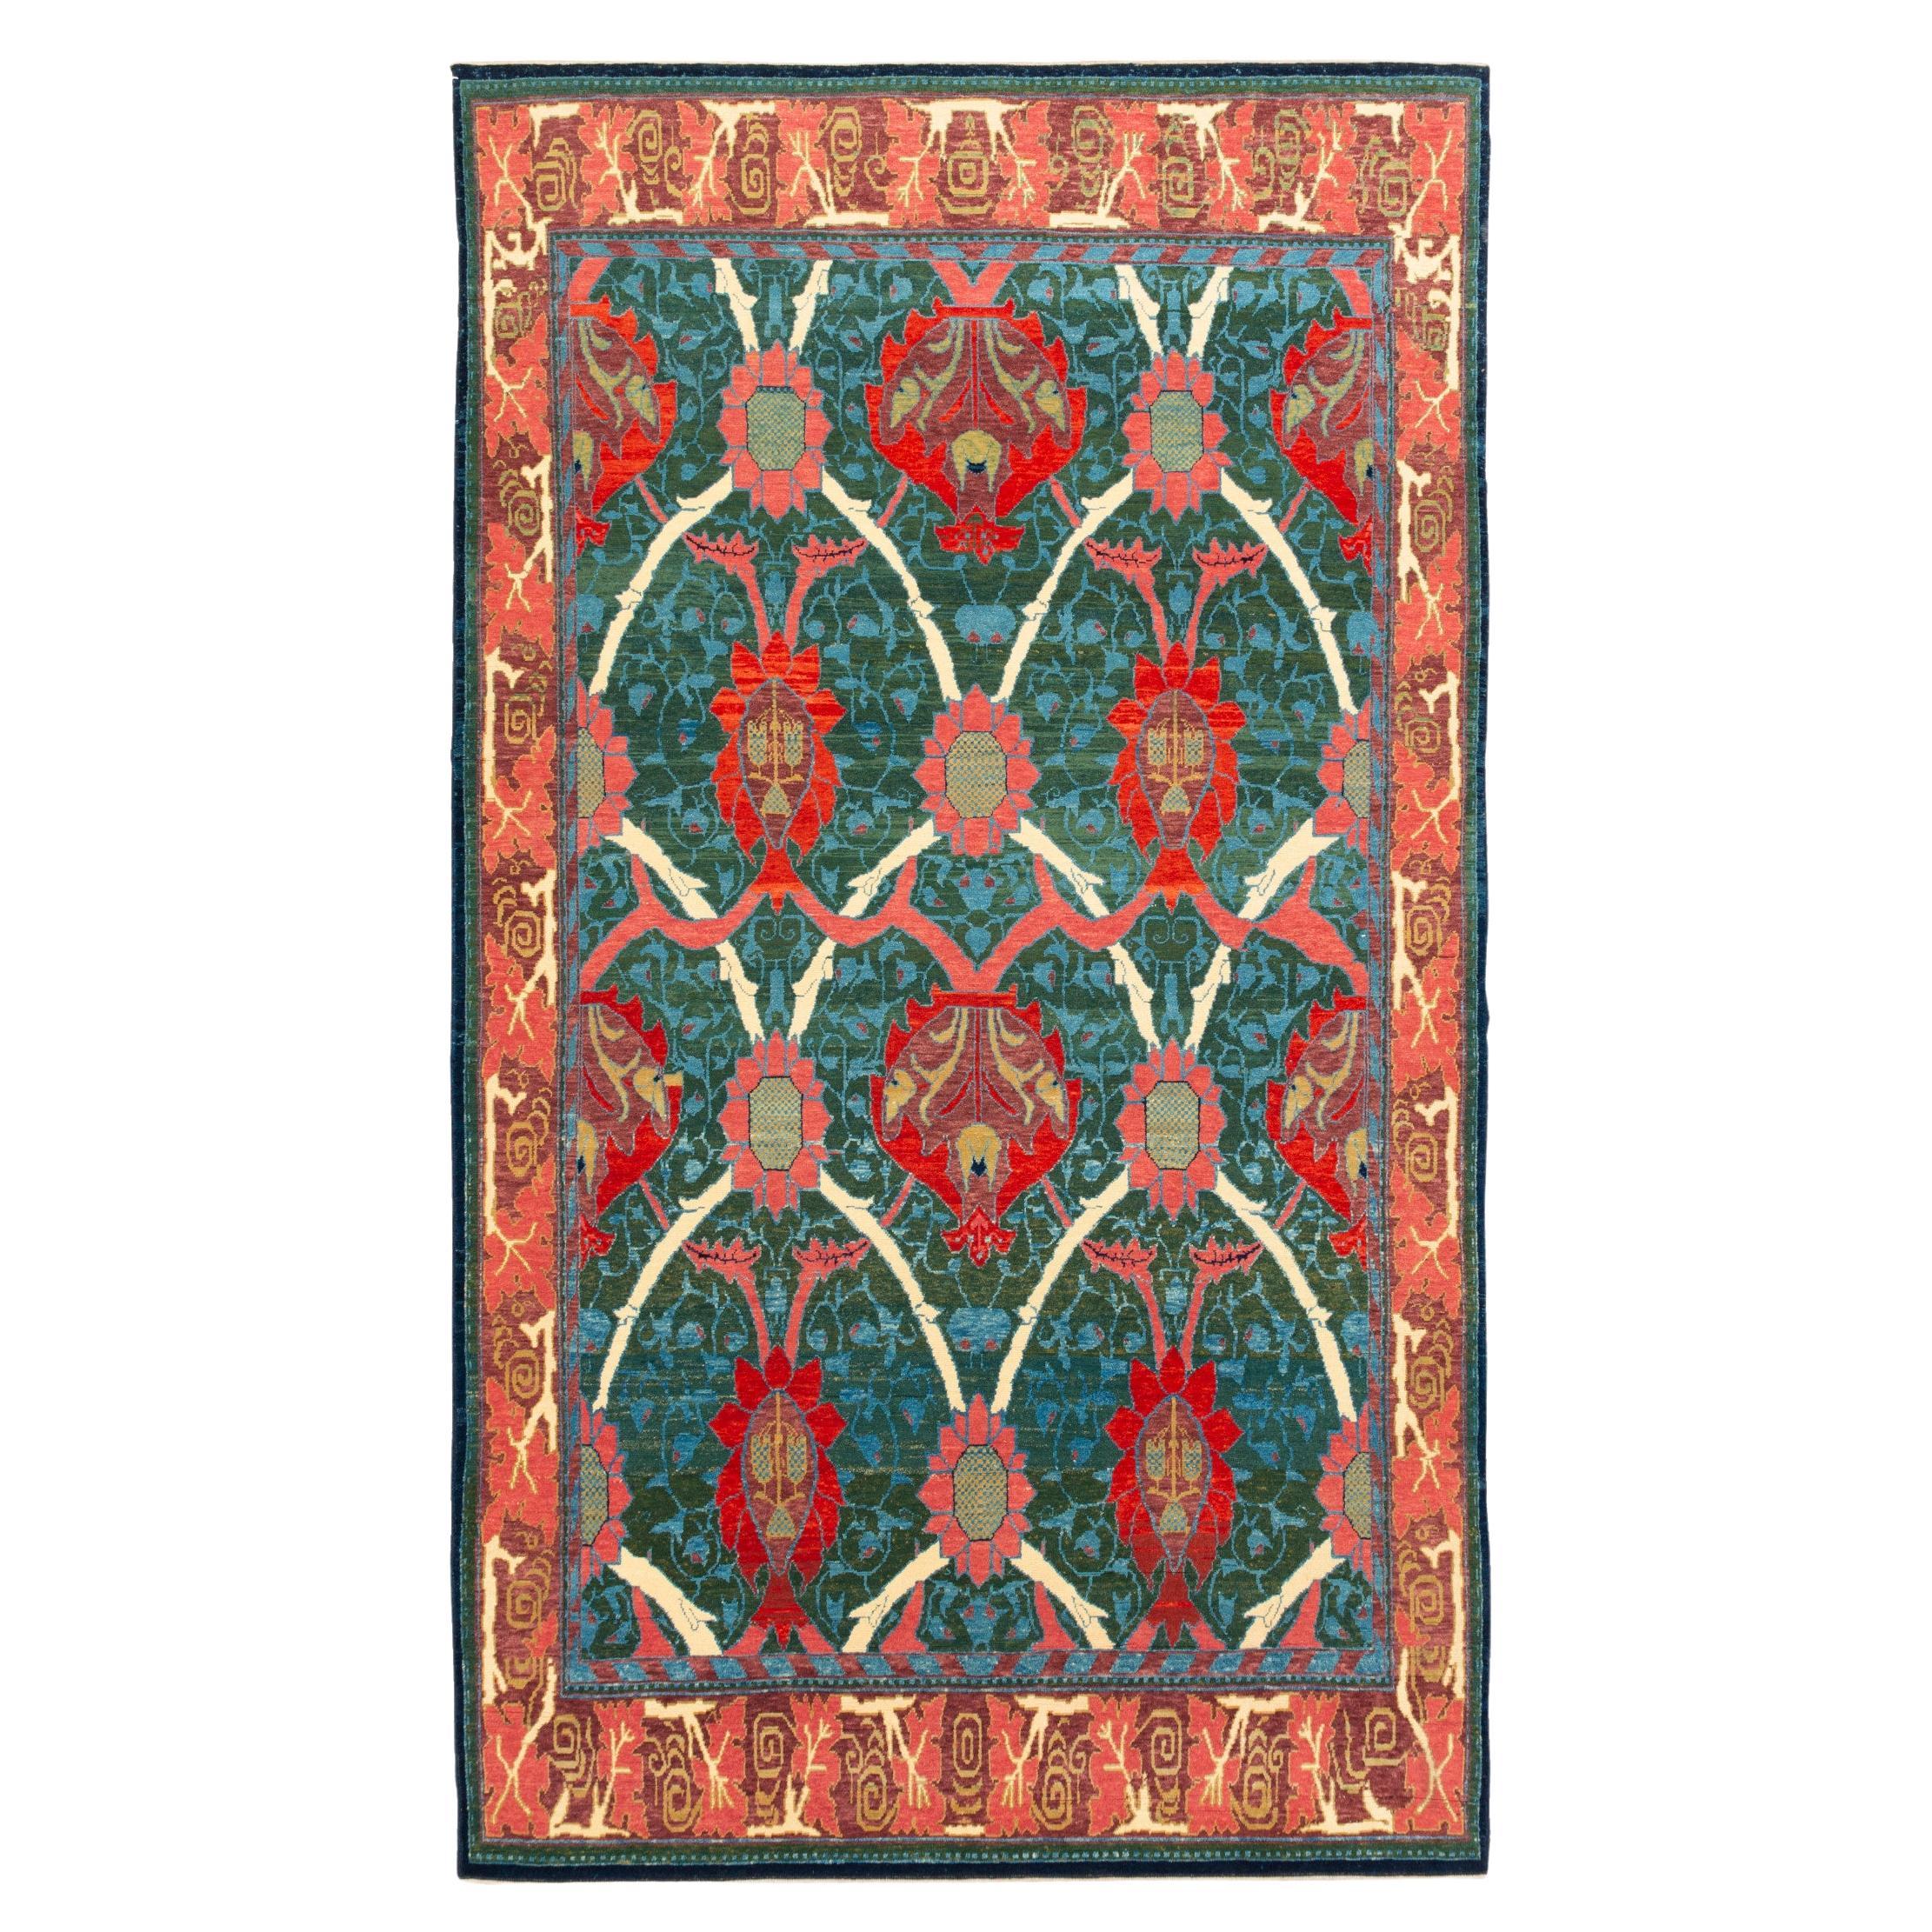 Ararat Rugs Holland Park William Morris Carpet, Arts and Crafts, Natural Dyed For Sale